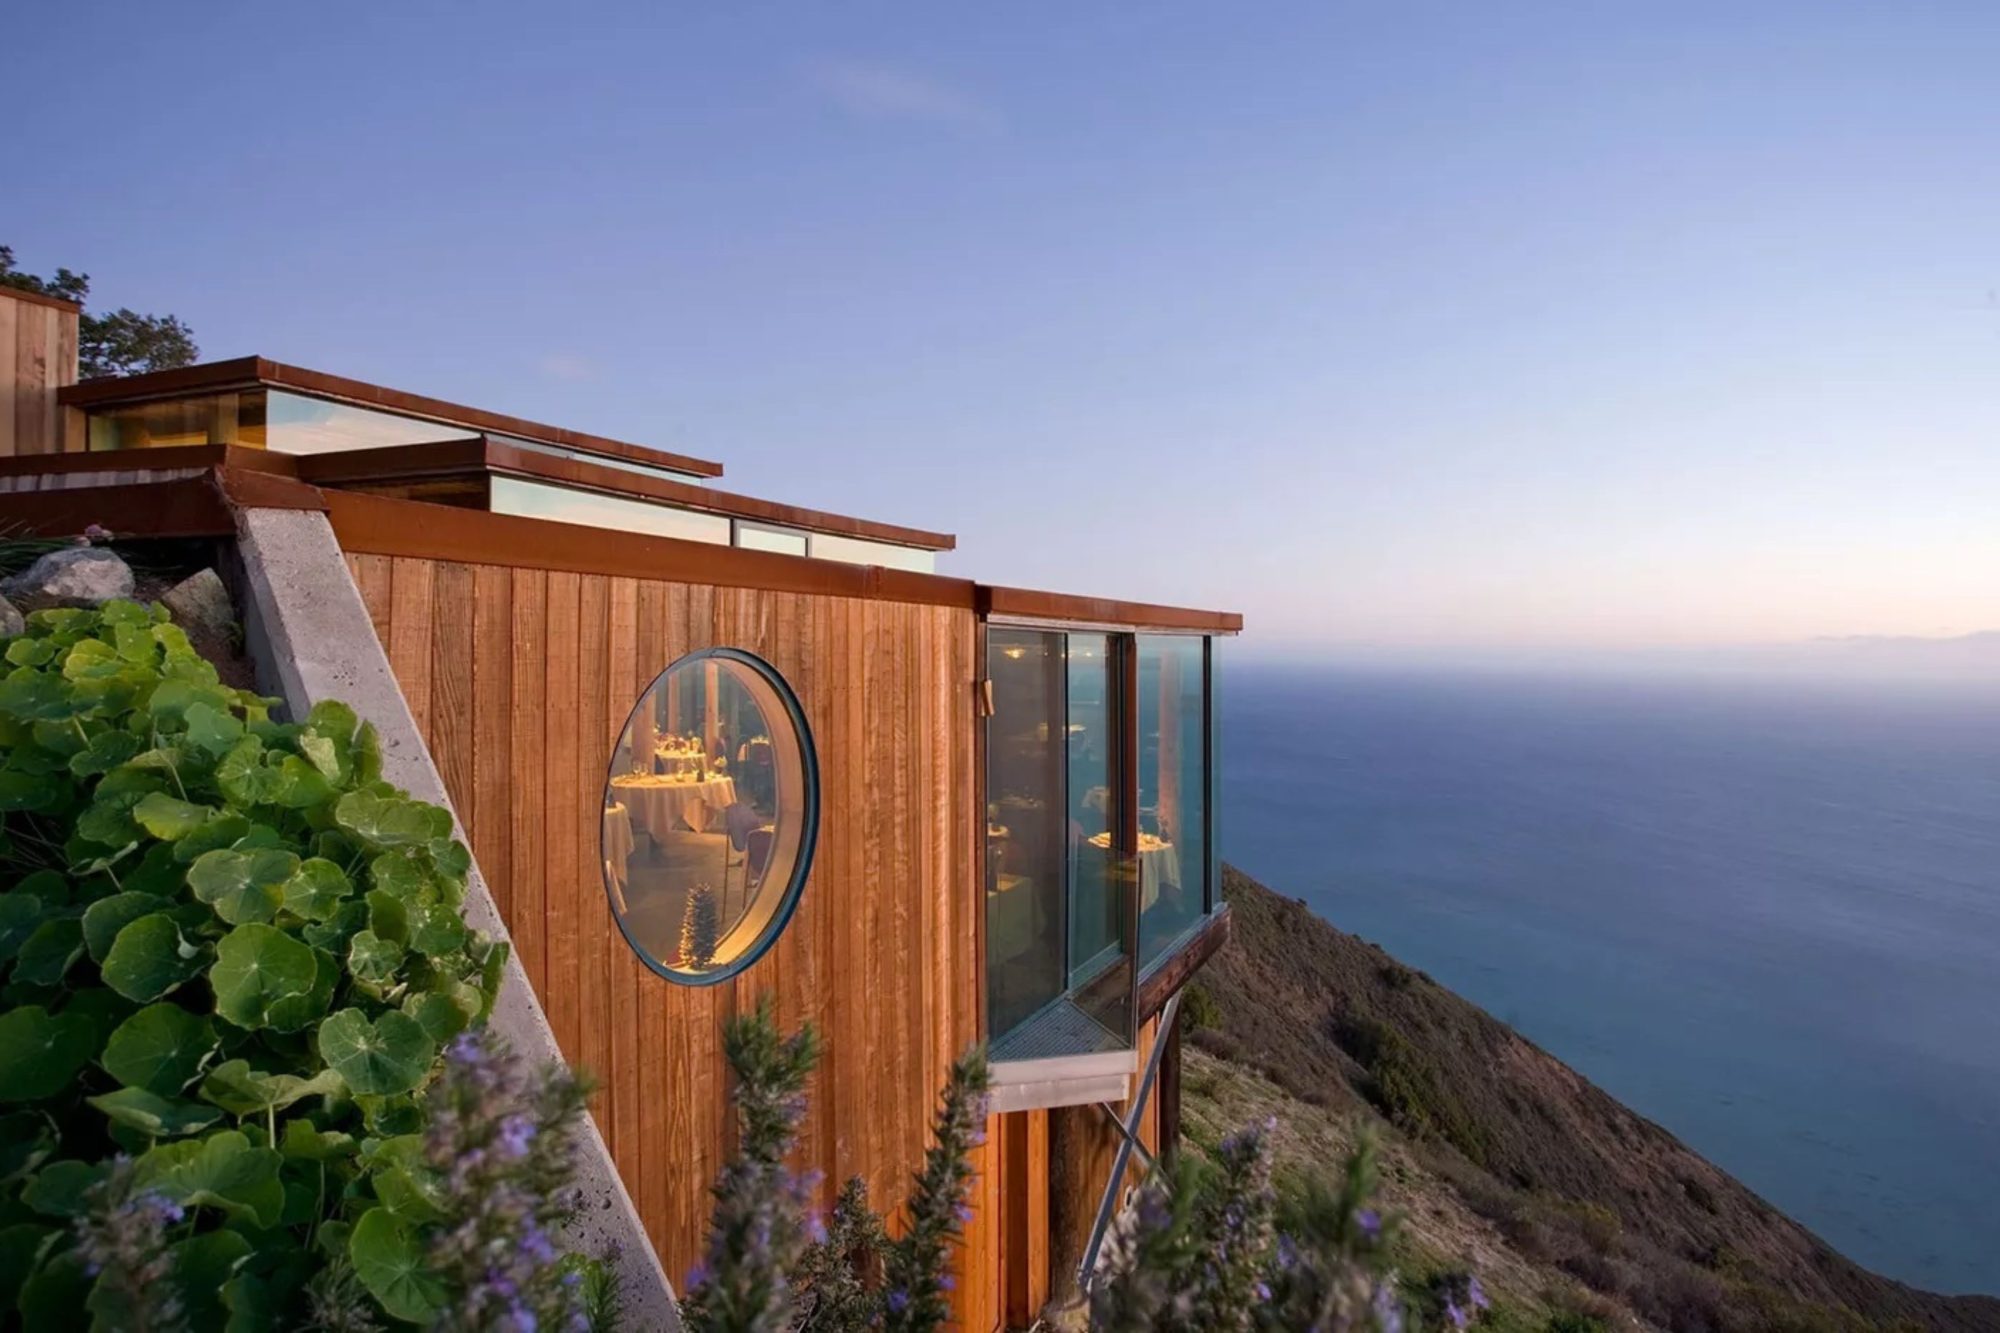 Big Sur’s Post Ranch Inn is an intimate escape above the Pacific